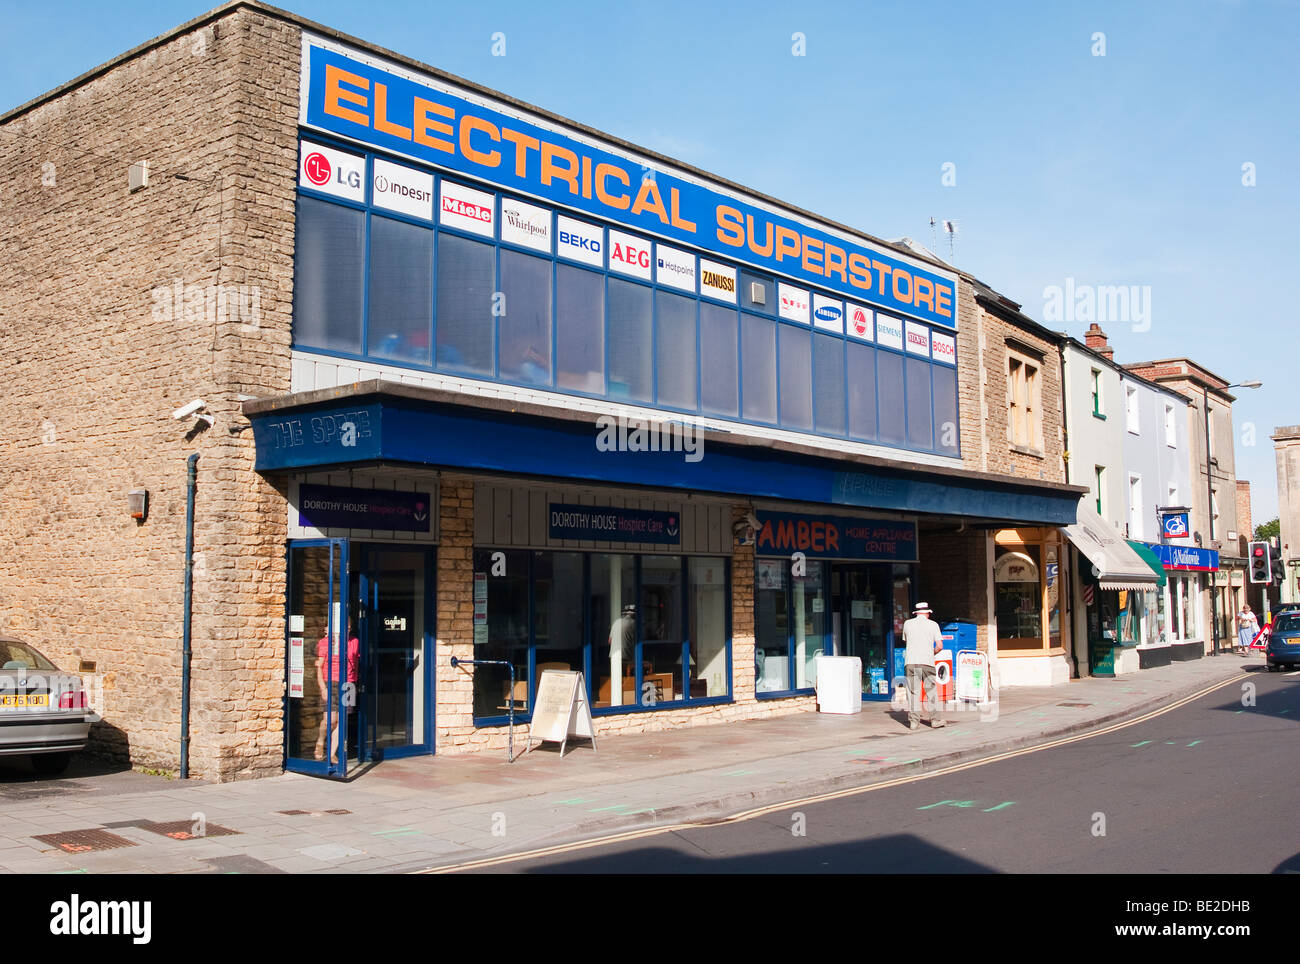 Electrical Superstore in the centre of a small market town in Wiltshire England UK EU Stock Photo